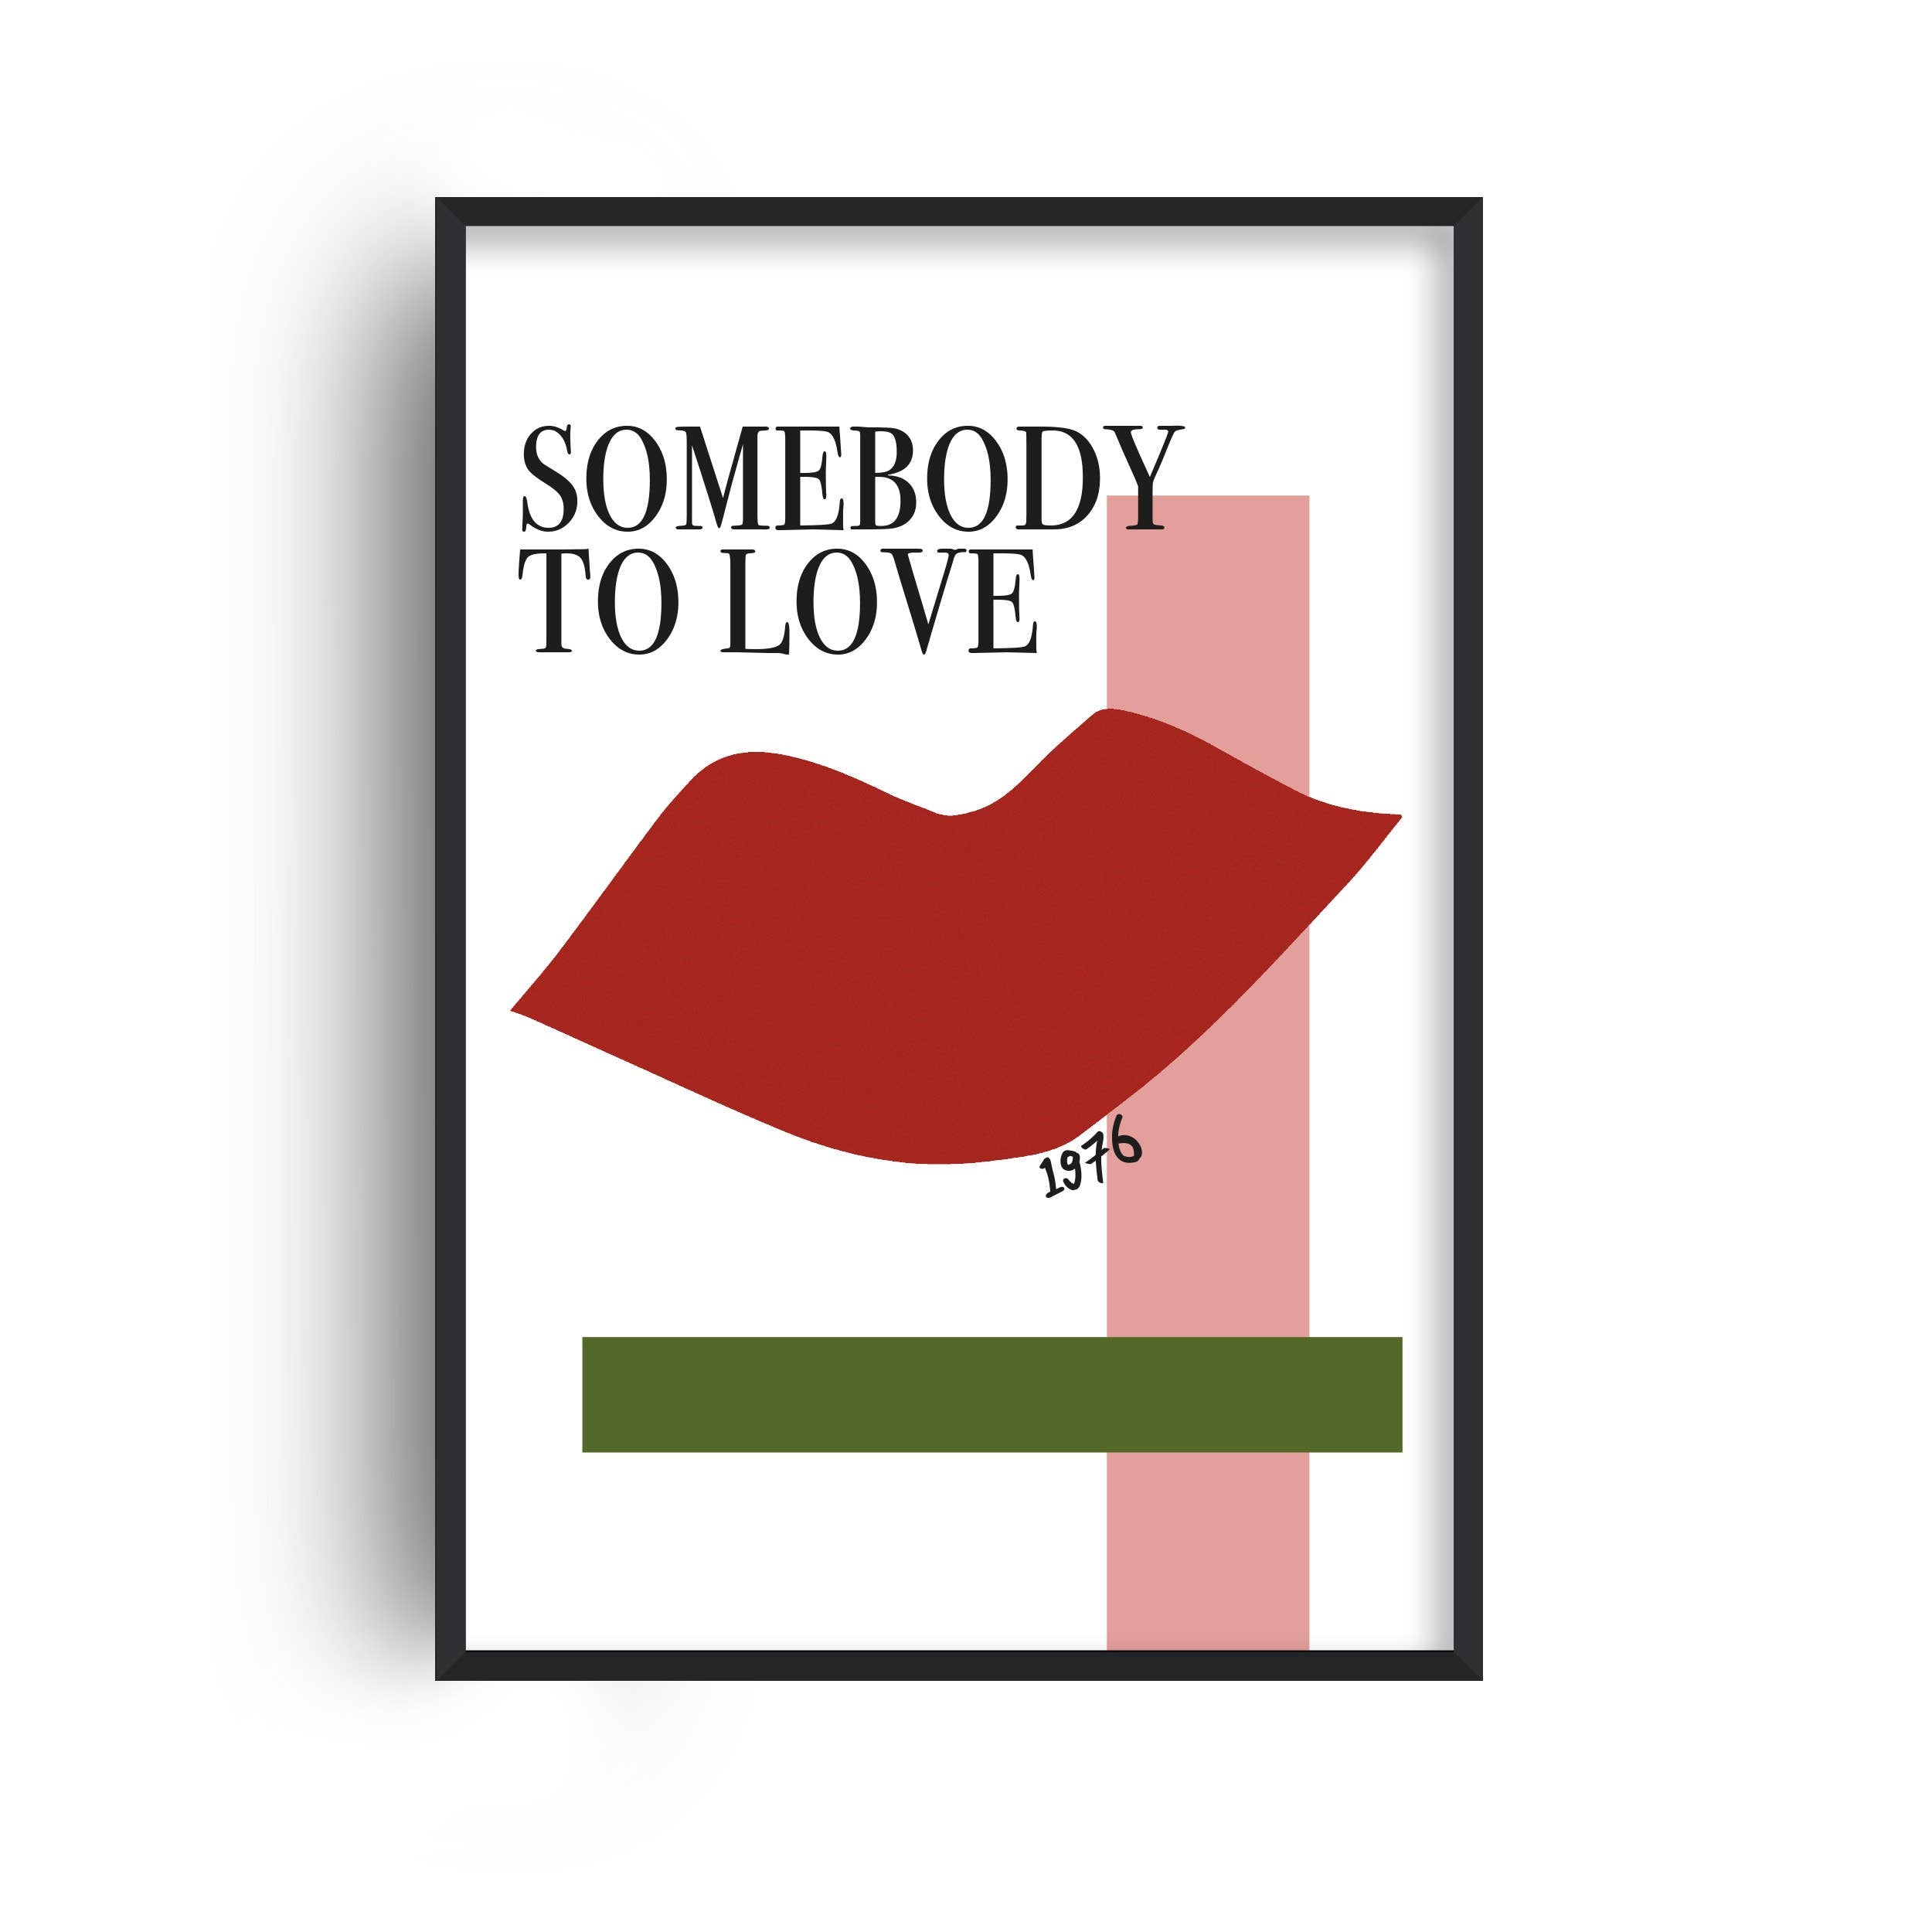 Somebody to Love Queen Inspired Retro Giclée Art Print - Out of the Blue